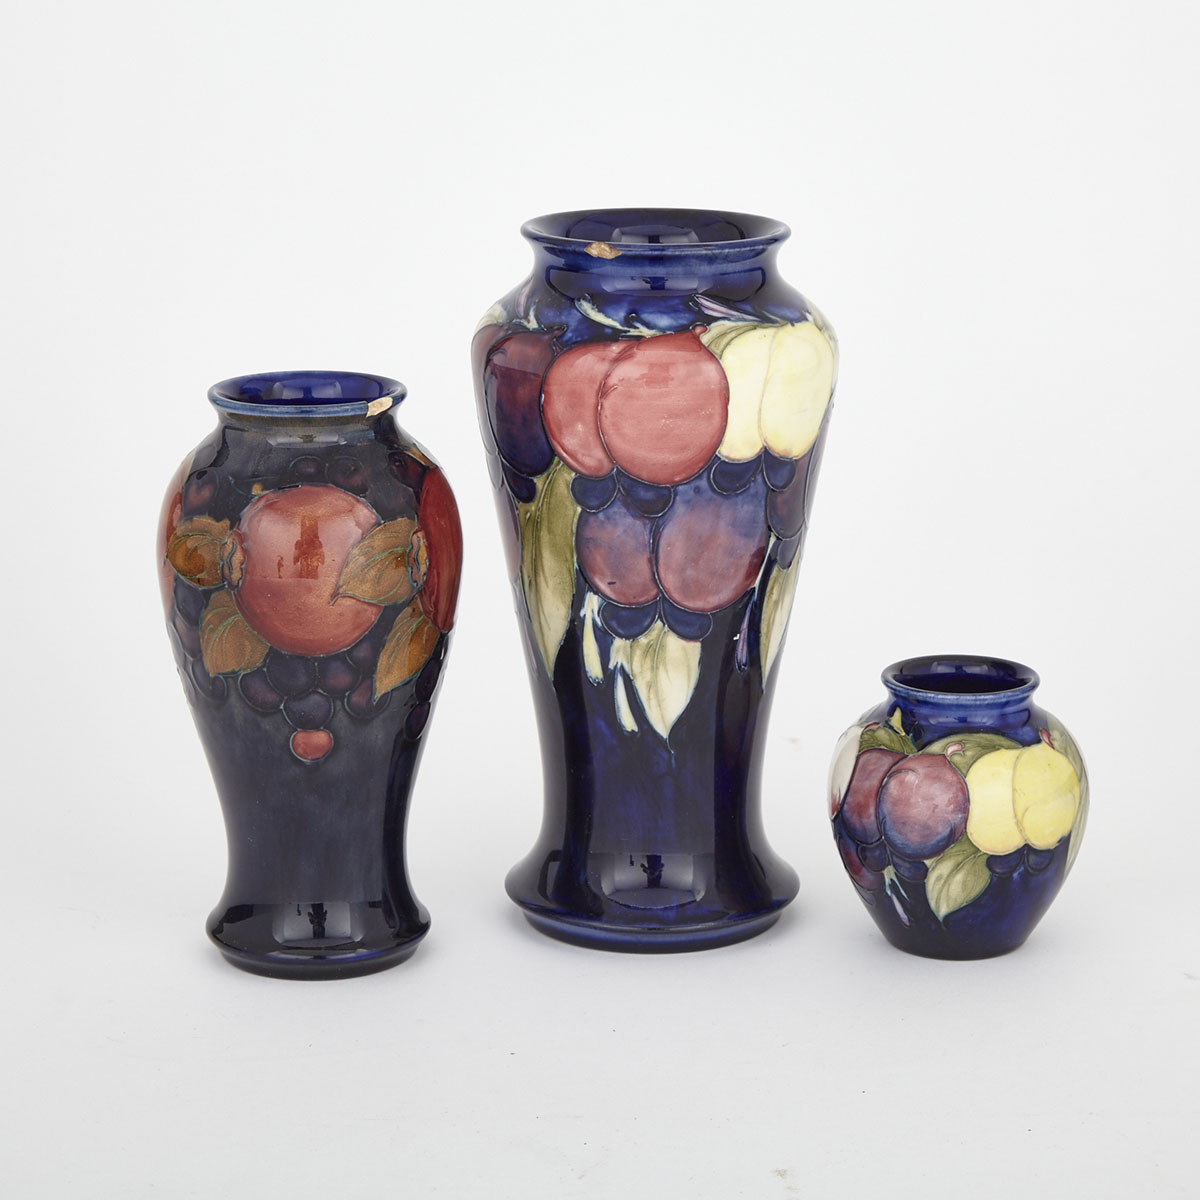 Two Moorcroft Wisteria Vases and a Pomegranate Vase, c.1925